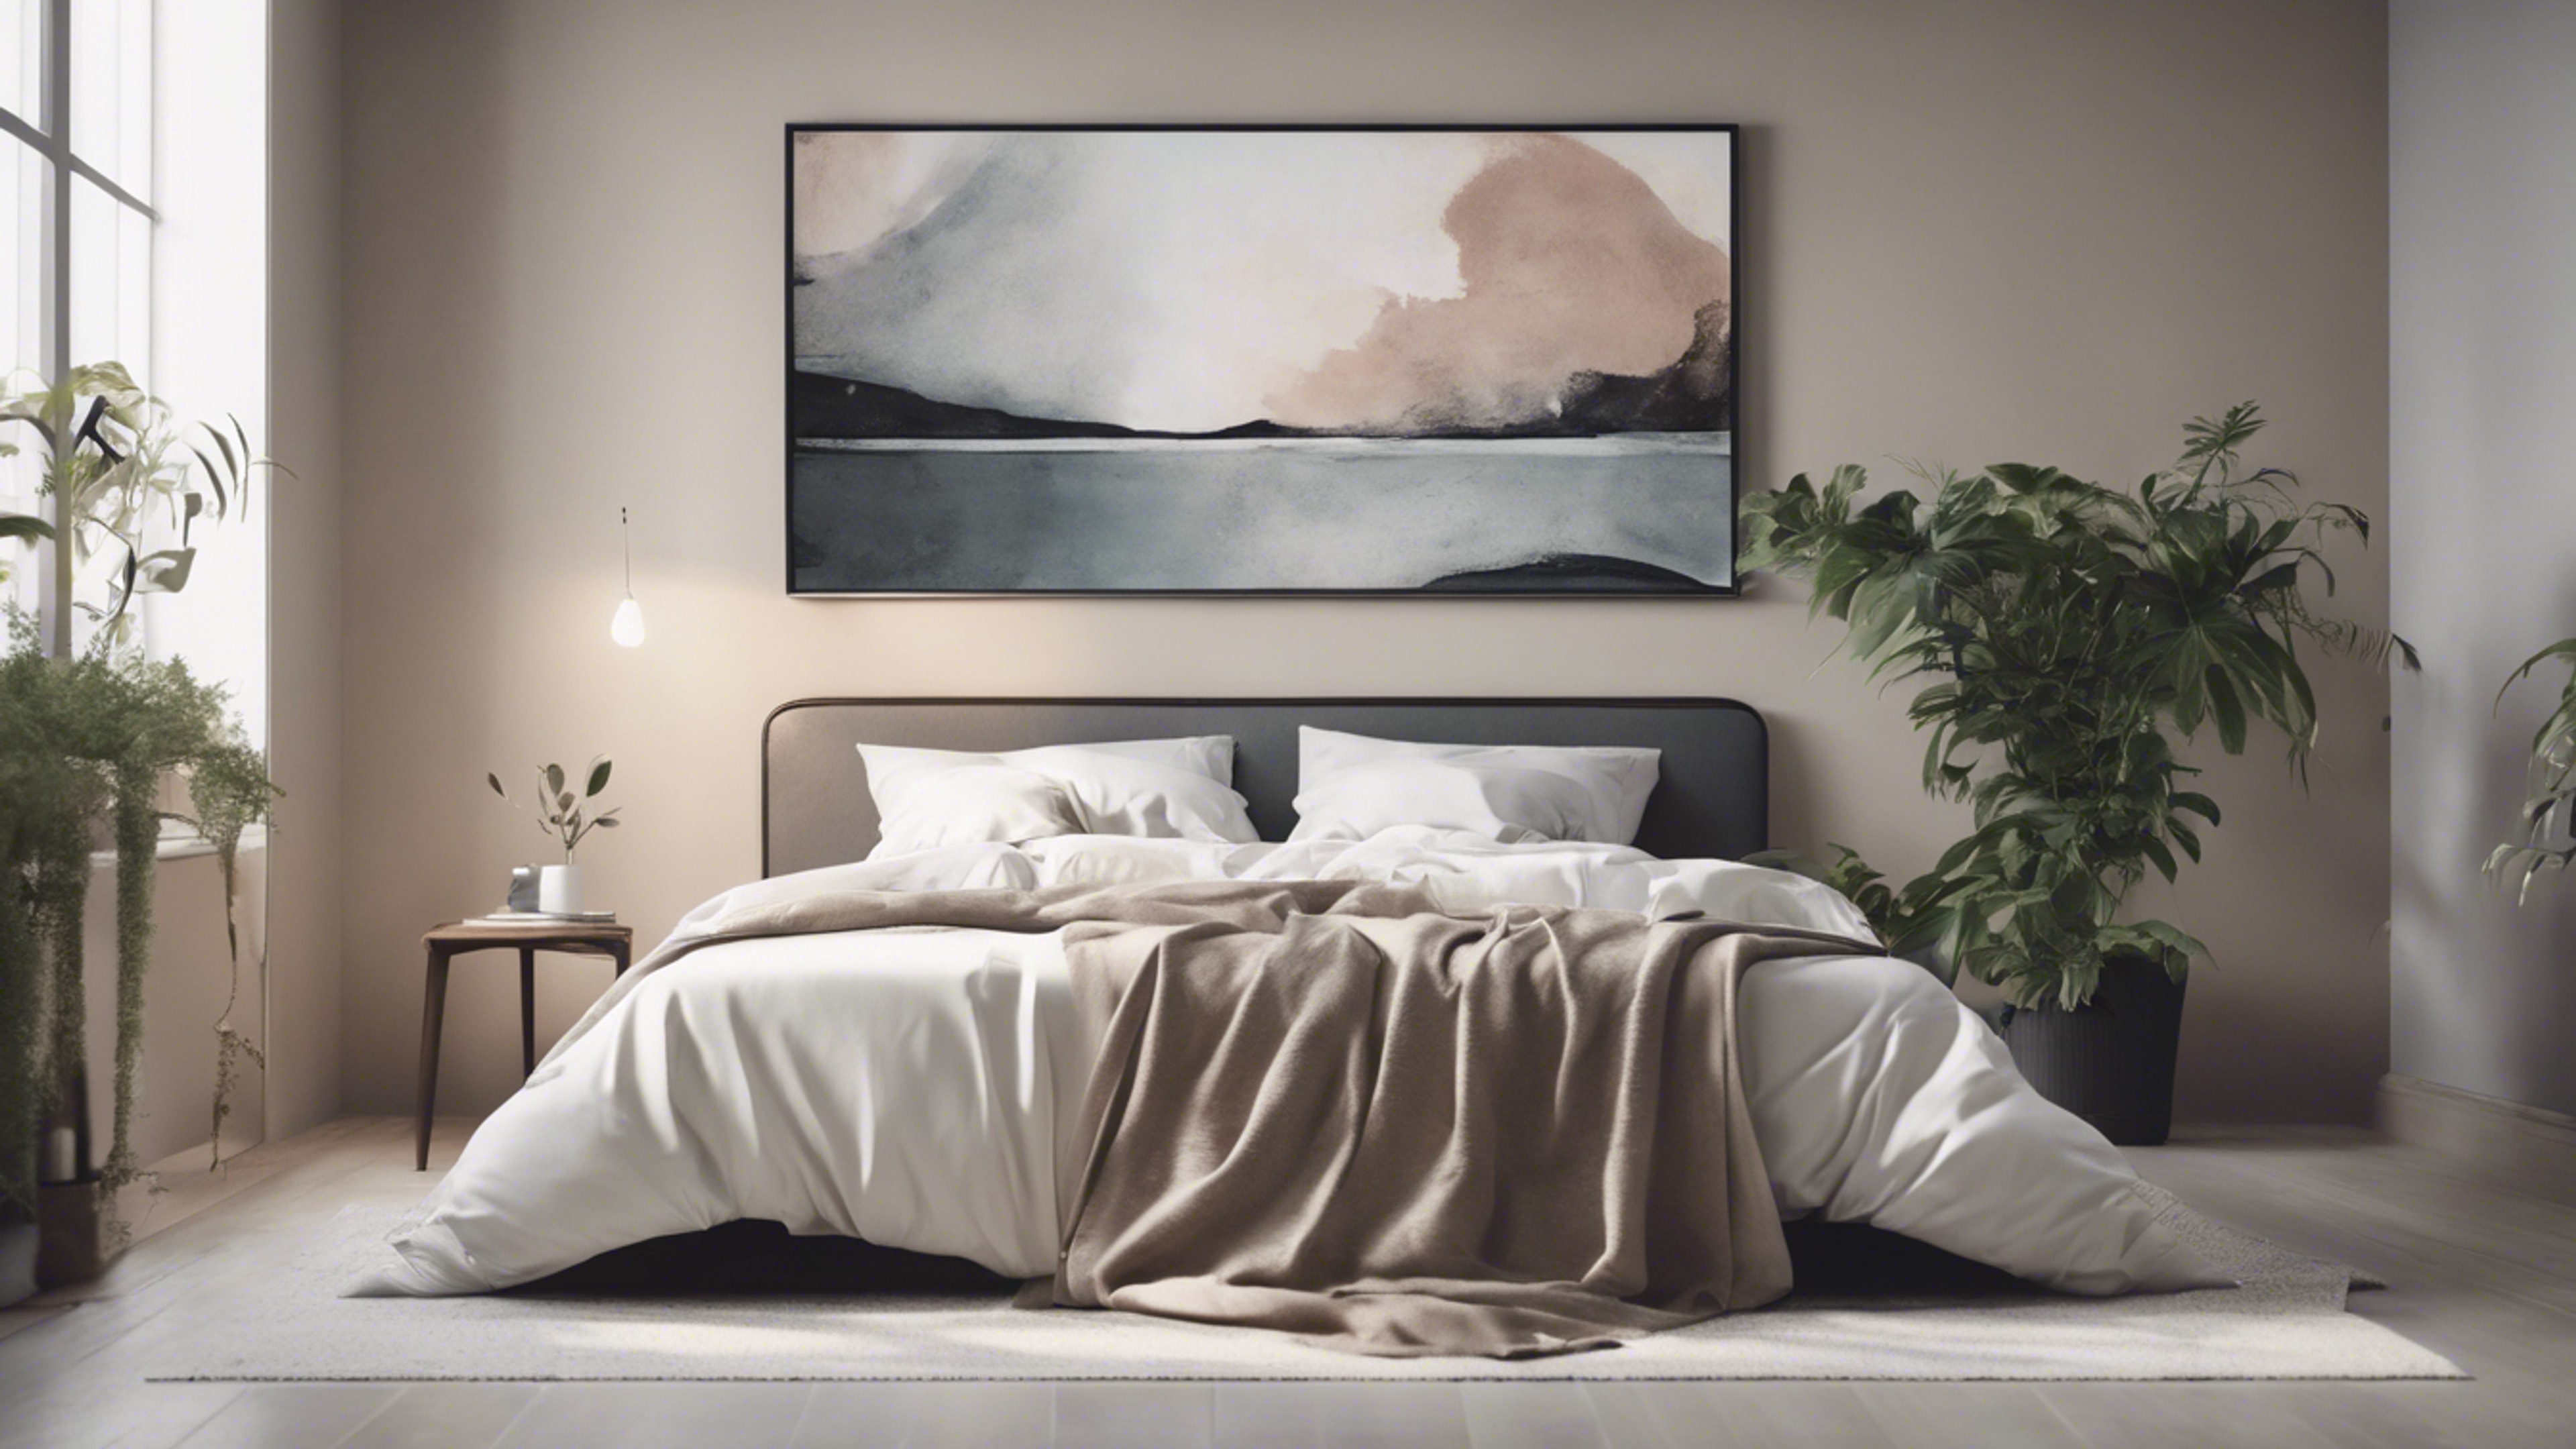 Minimalist bedroom in muted tones with a simple queen-sized bed, a potted plant, and an abstract painting. Валлпапер[015f6f42387b4ed28c5e]